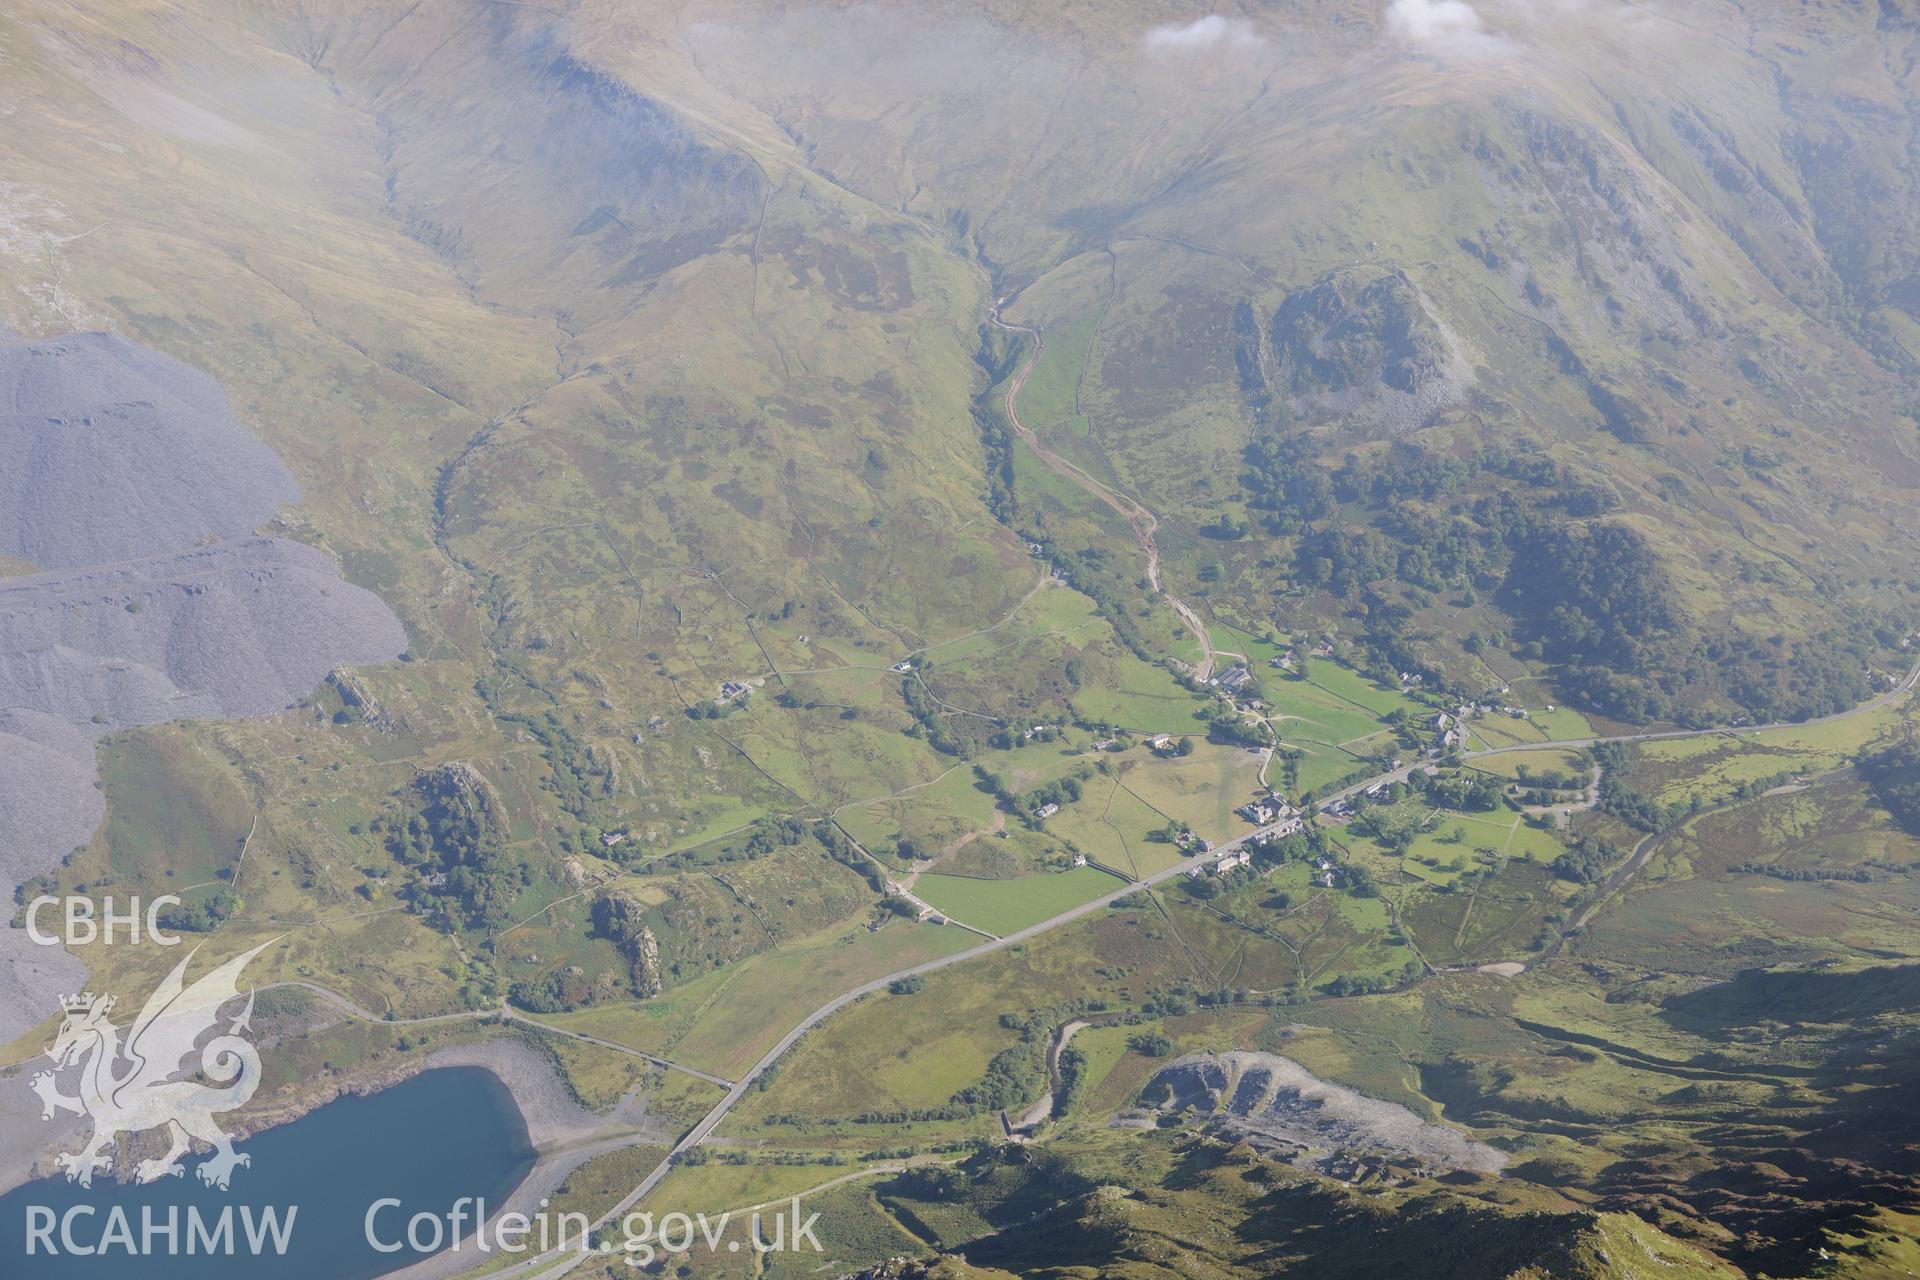 Dinorwic slate quarry and Llyn Peris Reservoir, Llanberis, and Gallt-y-Llan slate quarry, Nant Peris. Oblique aerial photograph taken during the Royal Commission's programme of archaeological aerial reconnaissance by Toby Driver on 2nd October 2015.